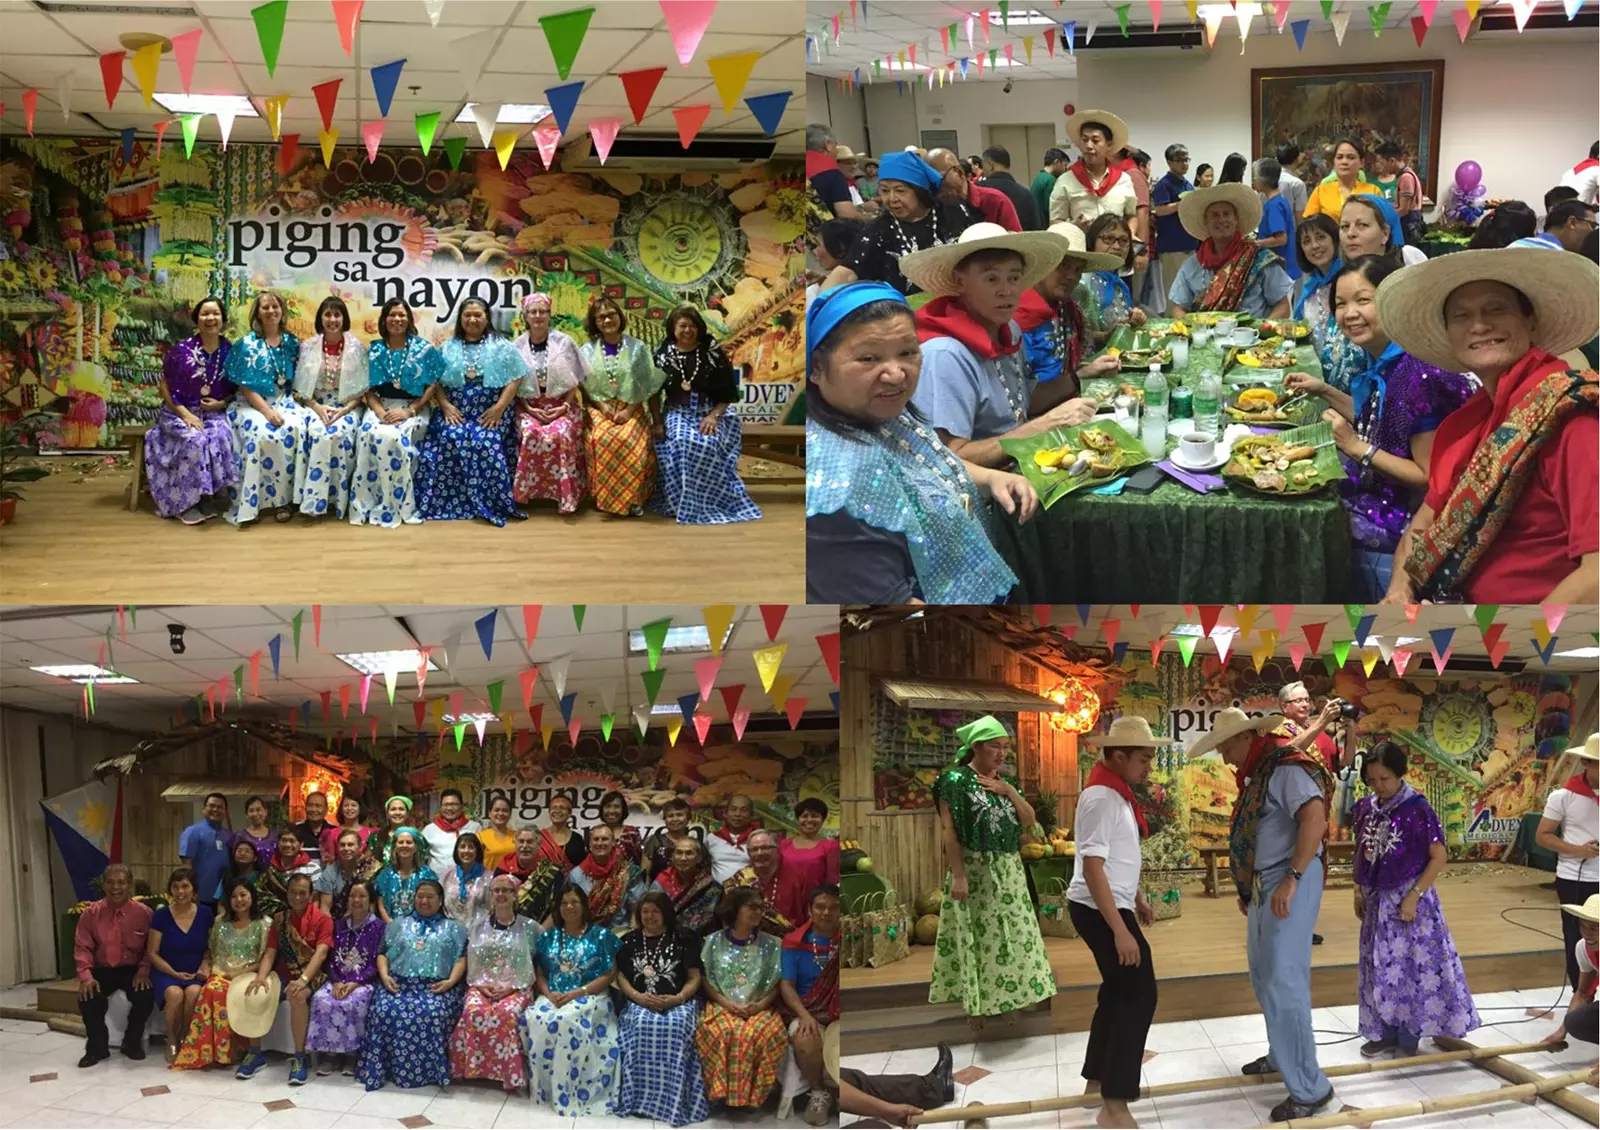 photo grid of filipino cultural celebration including traditional dress and dancing